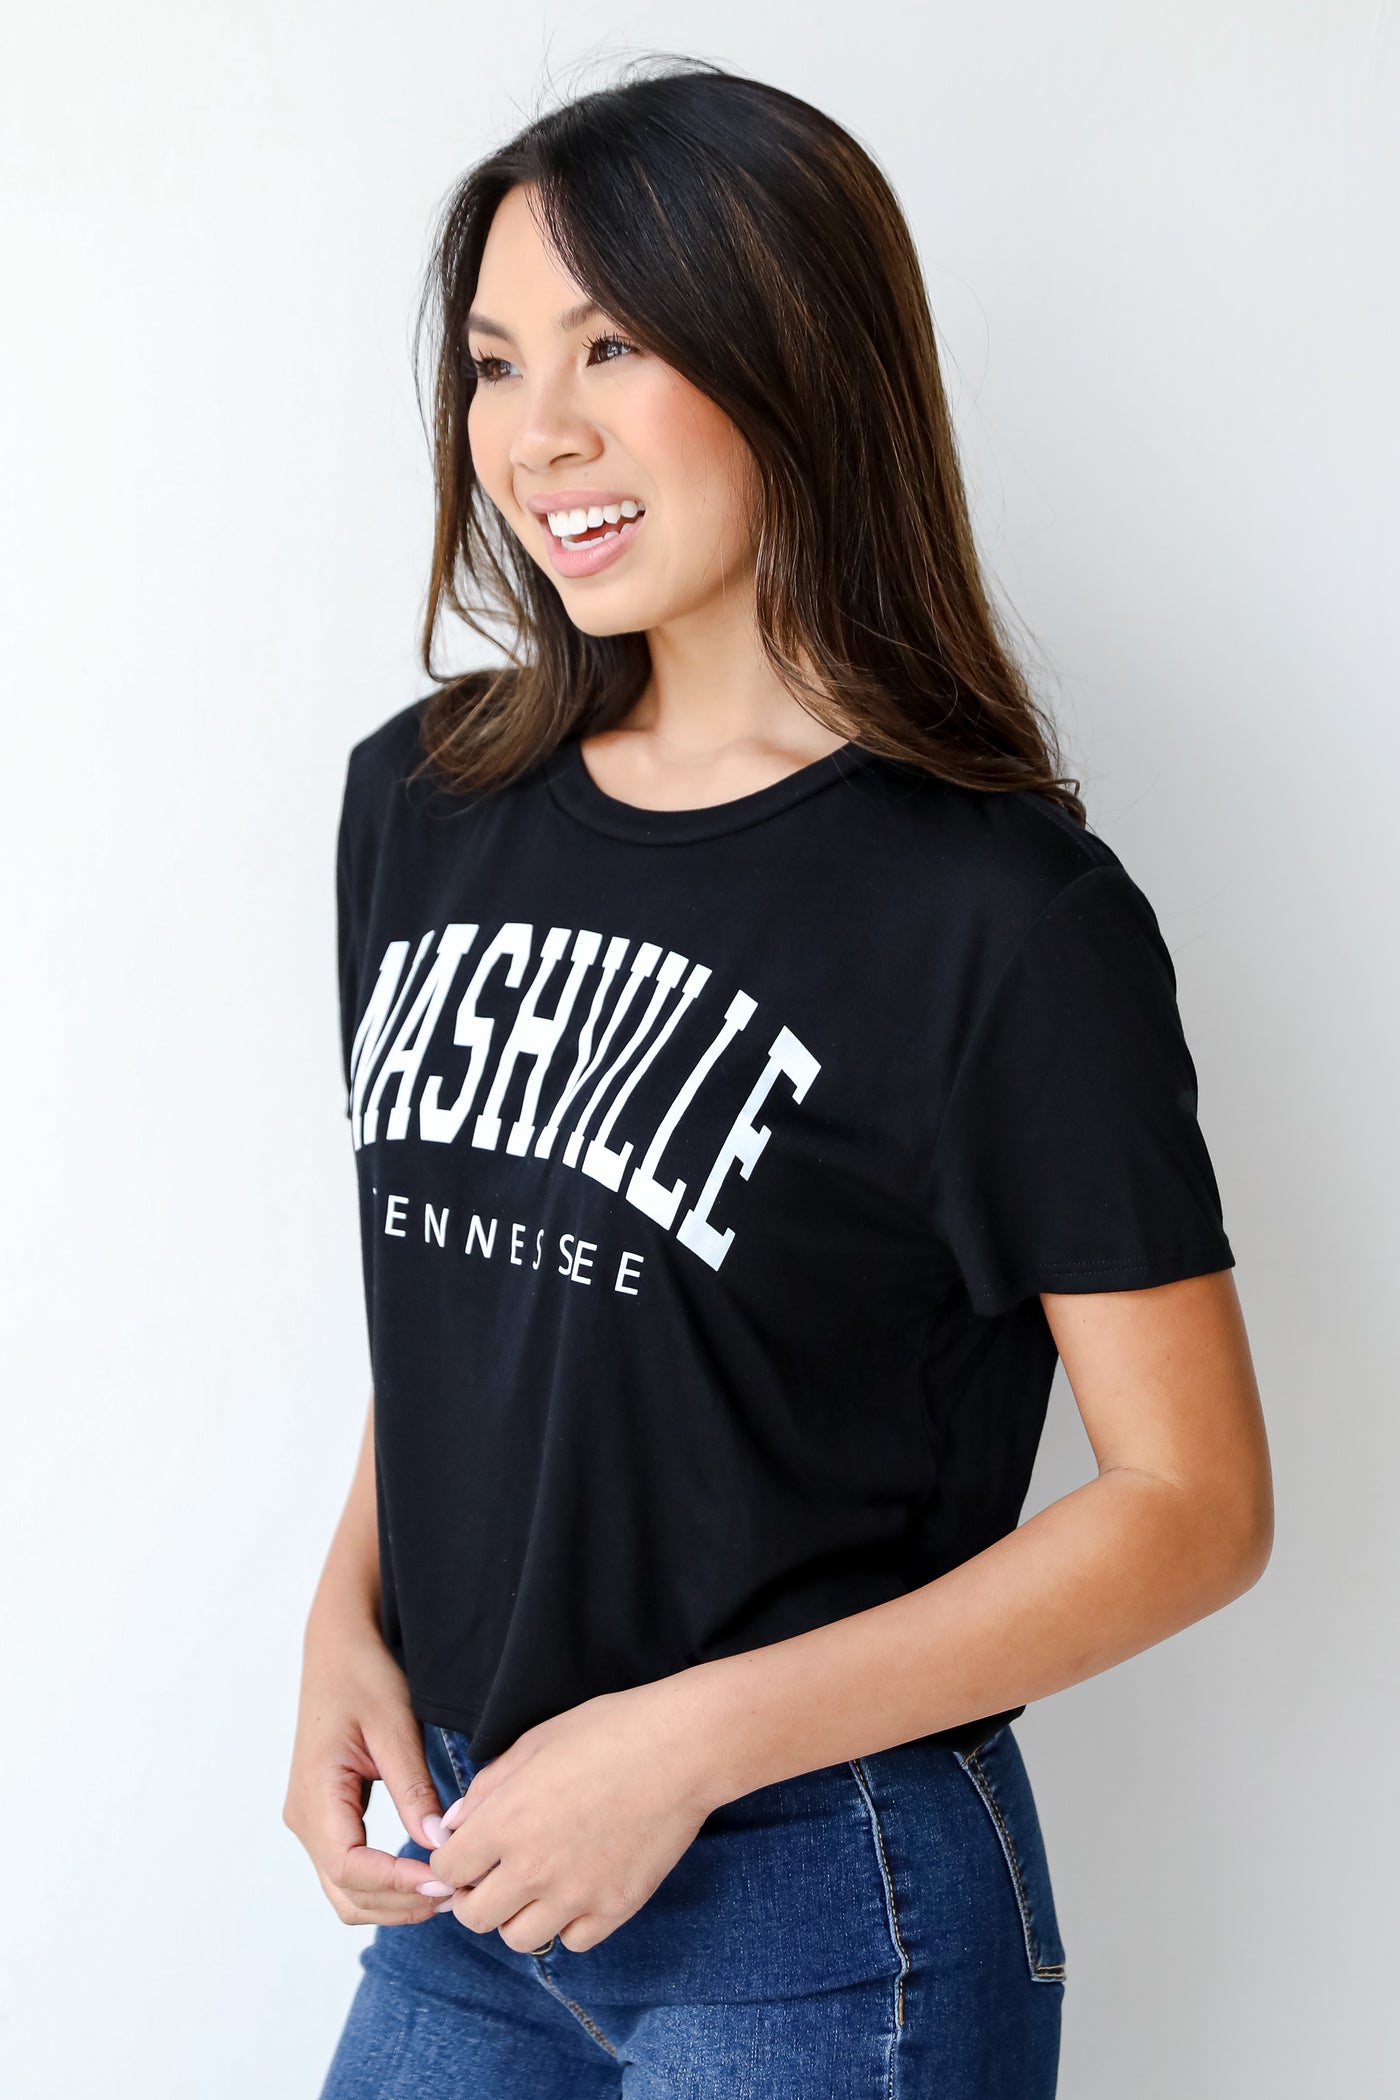 Nashville Tennessee Cropped Tee side view